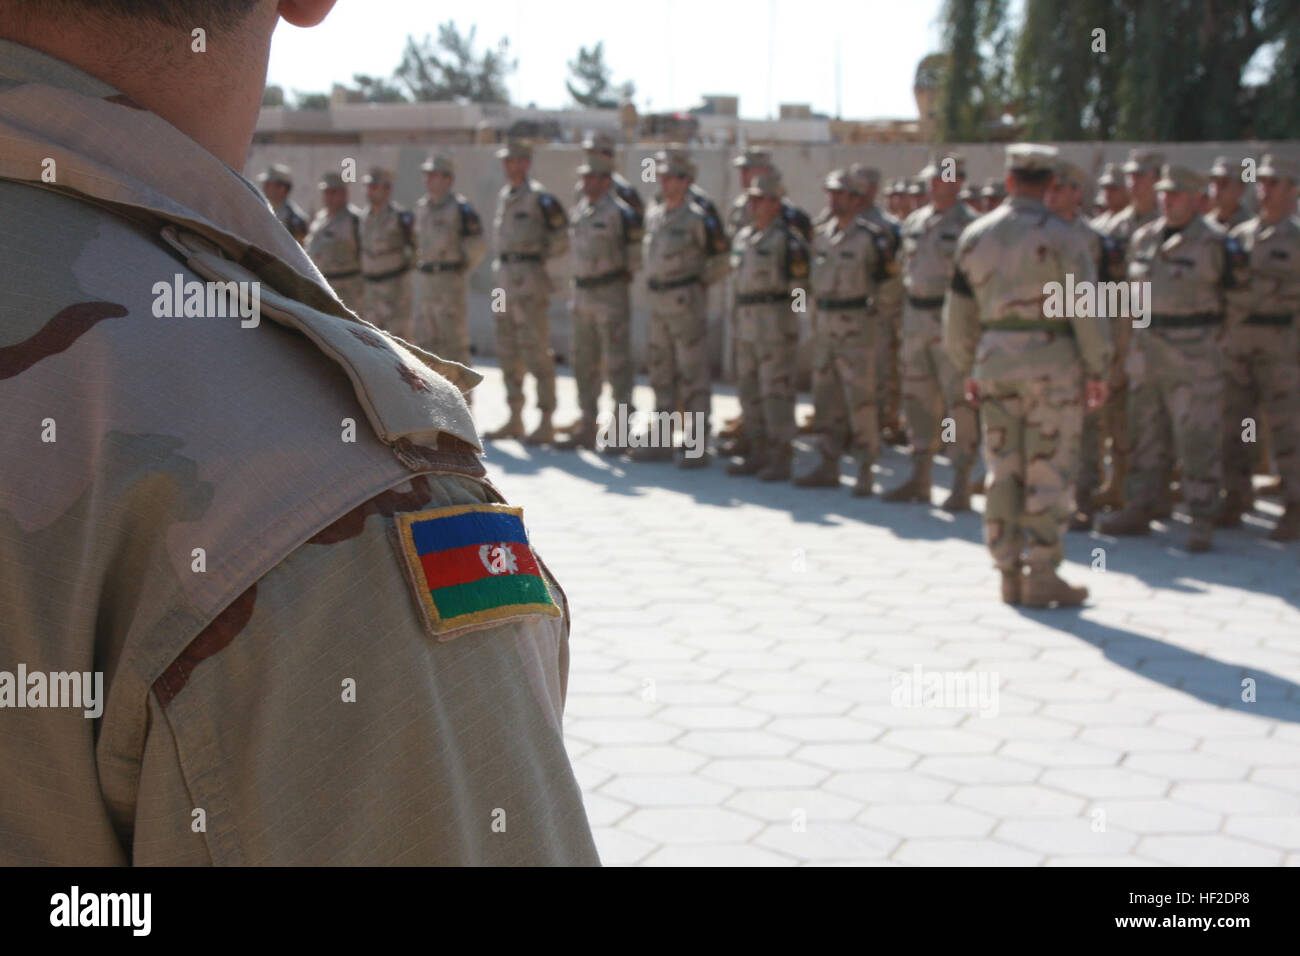 Azerbaijani army soldiers assigned to the 1st Azerbaijani Peacekeeping Company, stand in formation during a ceremony recognizing their contribution to Operation Iraqi Freedom at Camp Ripper, Asad, Iraq, Dec. 3, 2008. The Azerbaijan forces are in the process of leaving after providing security at the Haditha Dam since August of 2003. (U.S. Marine Corps photo by Cpl. Seth Maggard/Released) Azerbaijani soldiers in Iraq 31 Stock Photo